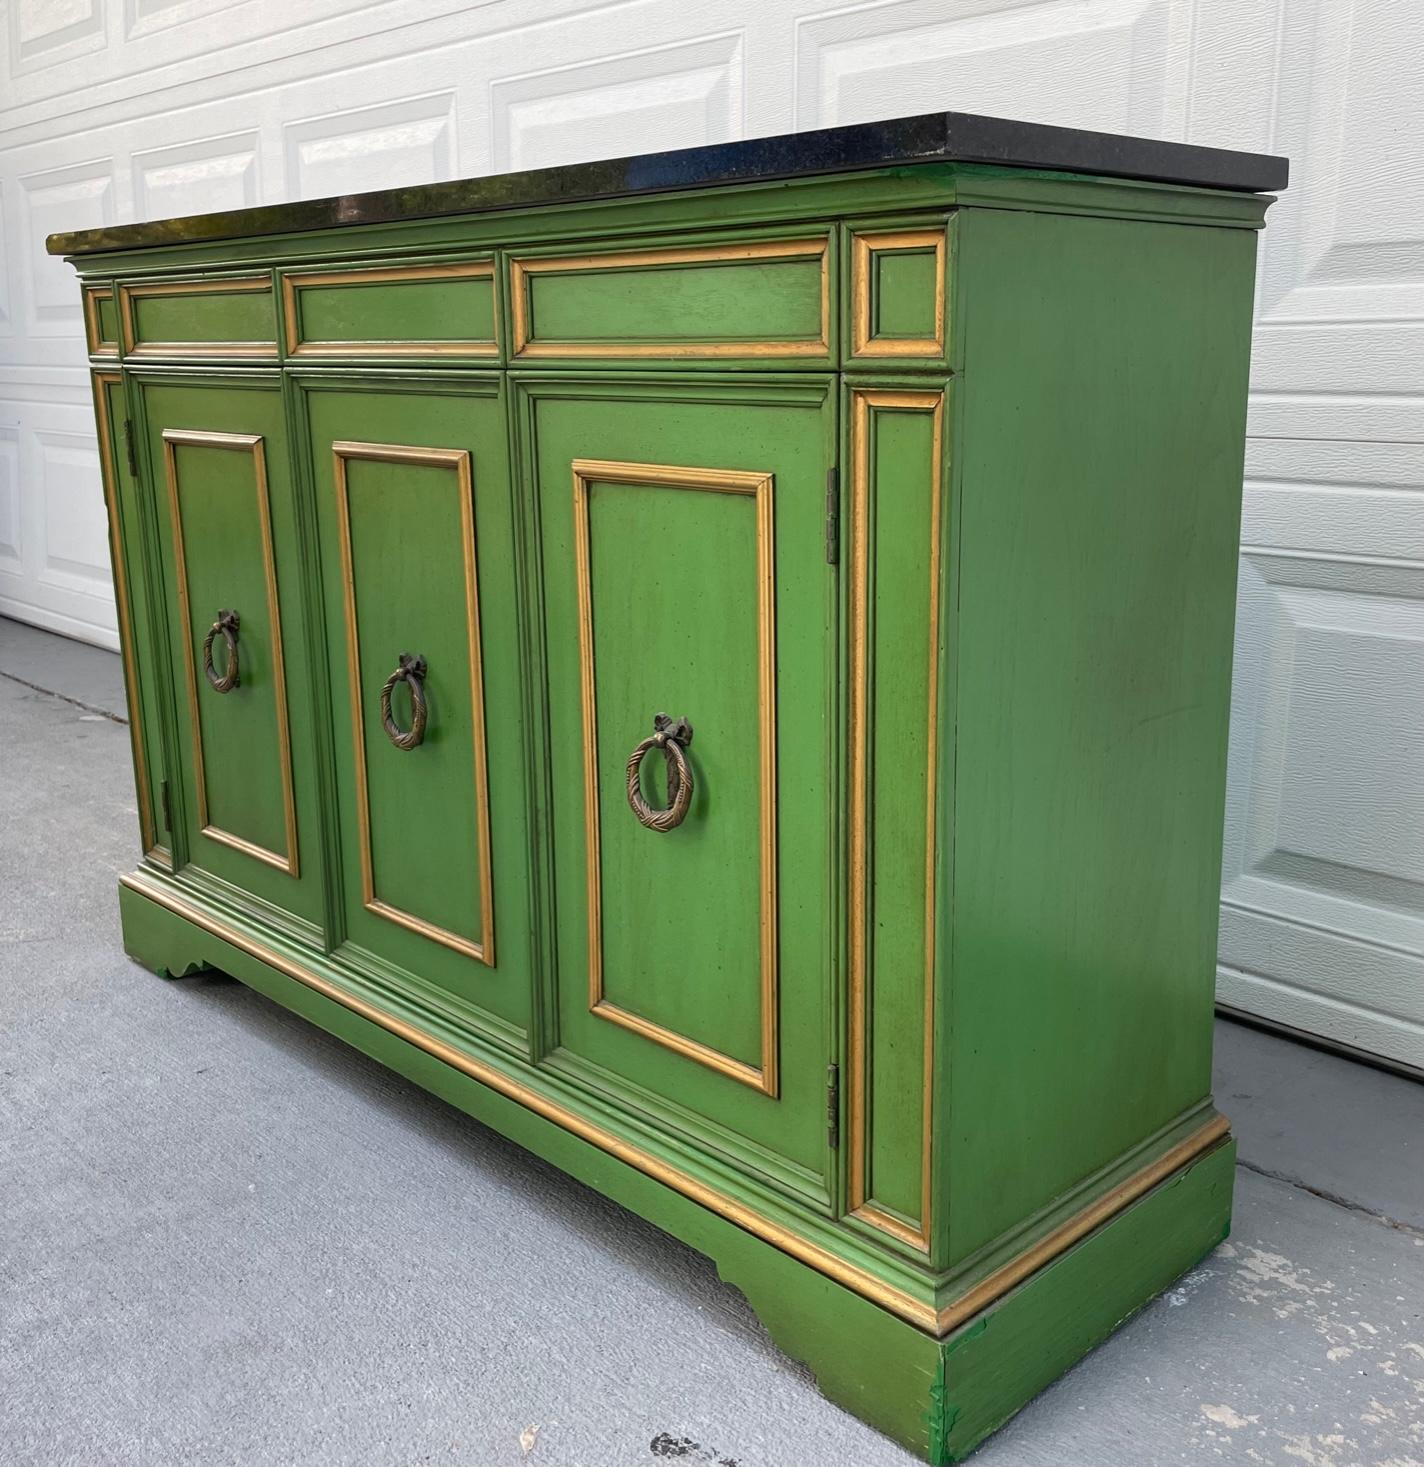 Vintage Hollywood Regency marble top emerald green credenza with gold accents.

Vintage Stylish Hollywood Regency low credenza is in the style of the German furniture designer, Tommi Parzinger. This fabulous Italian piece in vibrant emerald green